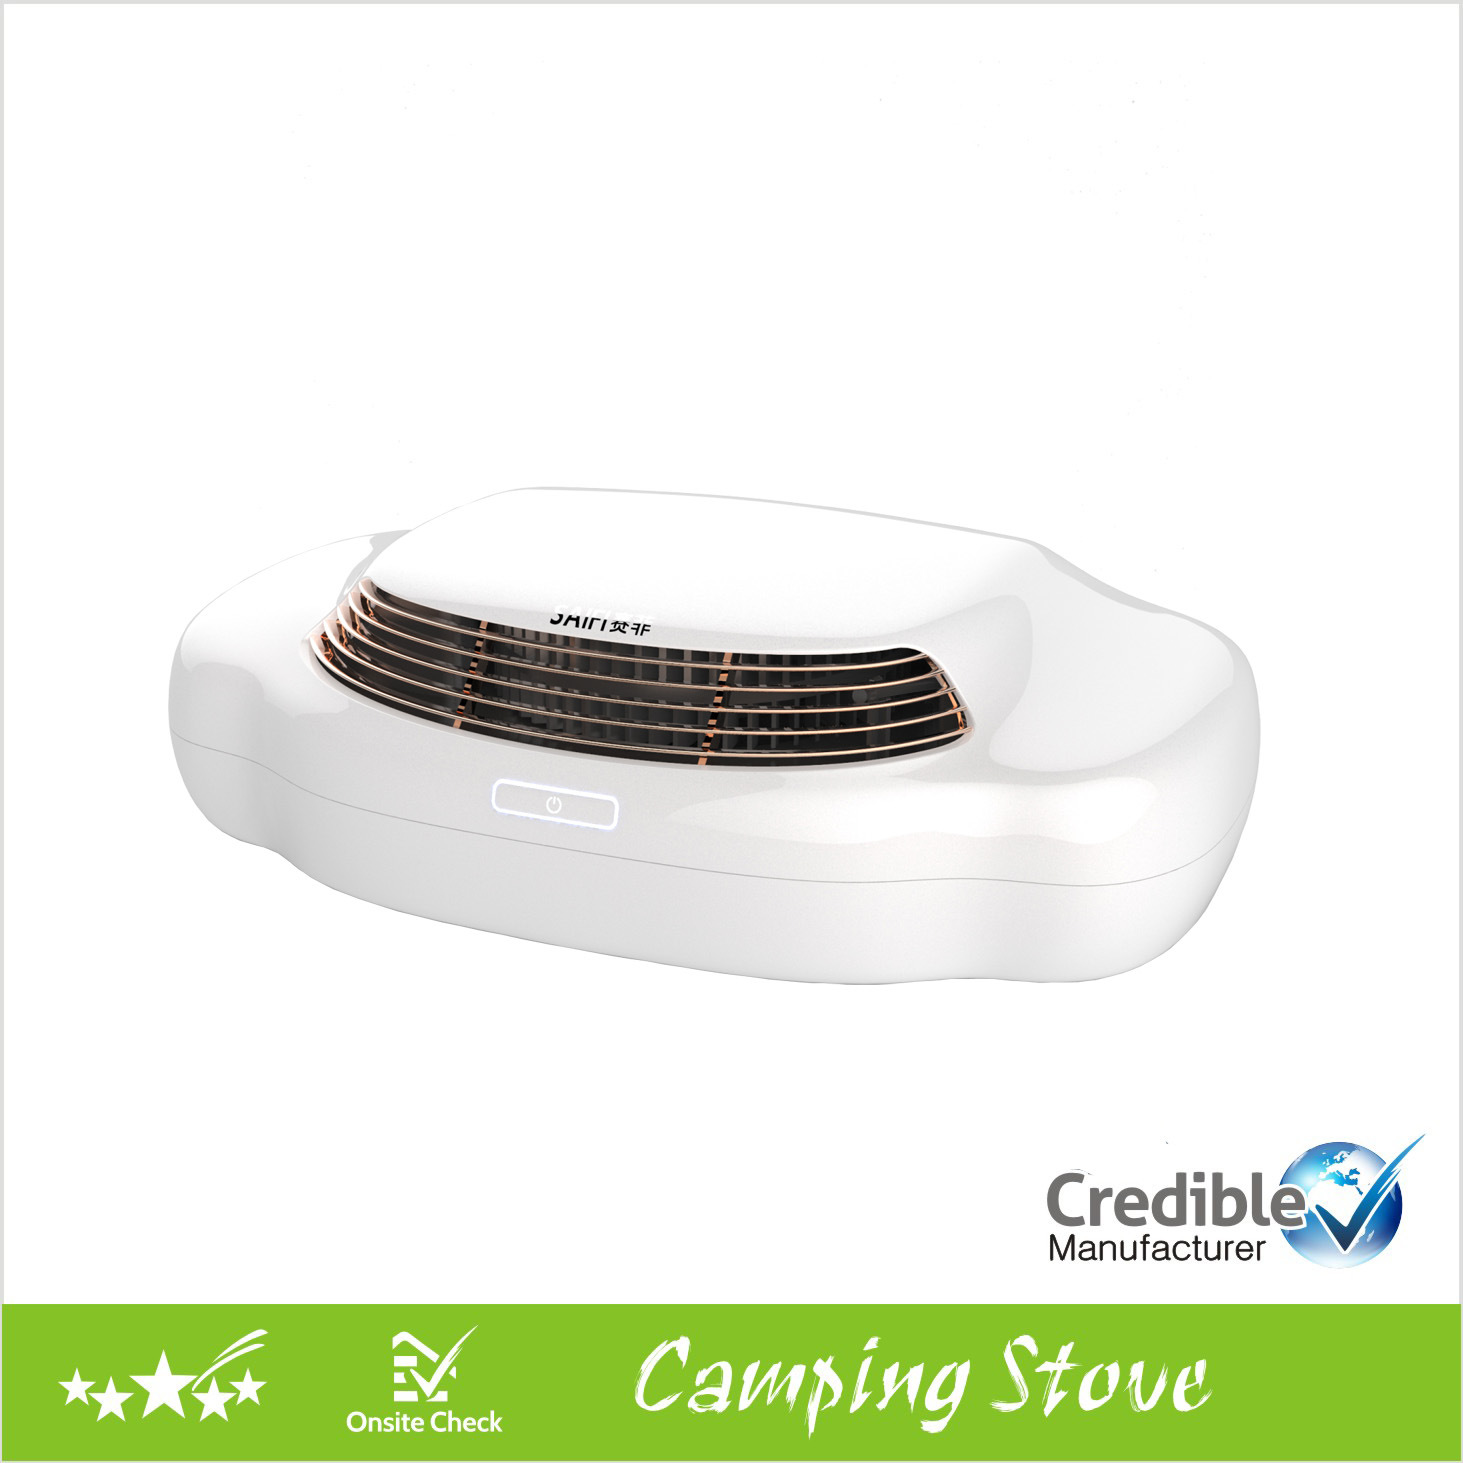 New Air Purifier for Car, Bedroom, Office in Cool Design